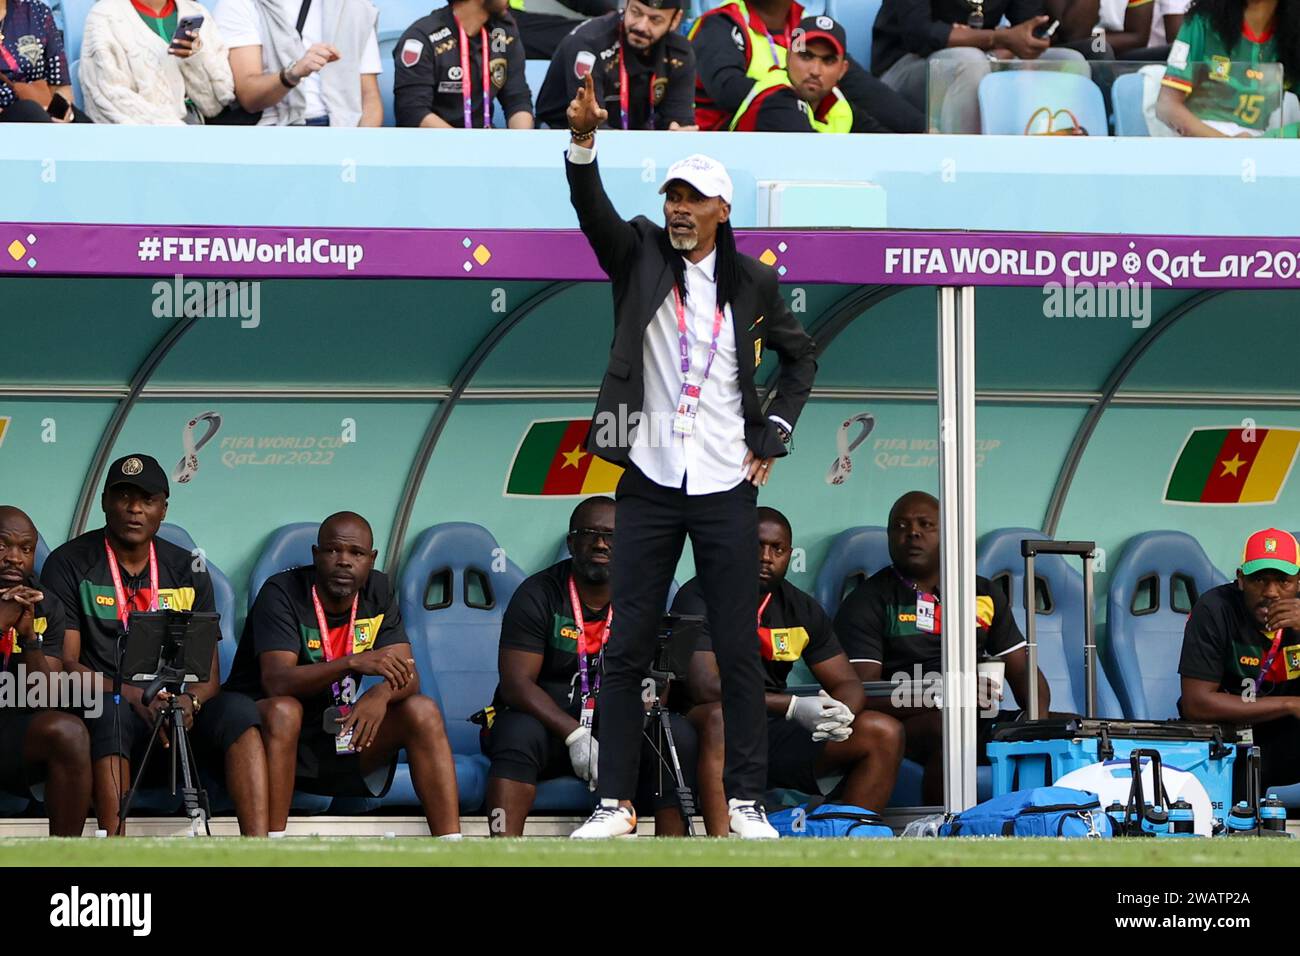 Coach Rigobert Song of Cameroon seen during the FIFA World Cup Qatar 2022 match between Cameroon and Serbia at Al Janoub Stadium. Final score: Cameroon 3:3 Serbia. Stock Photo